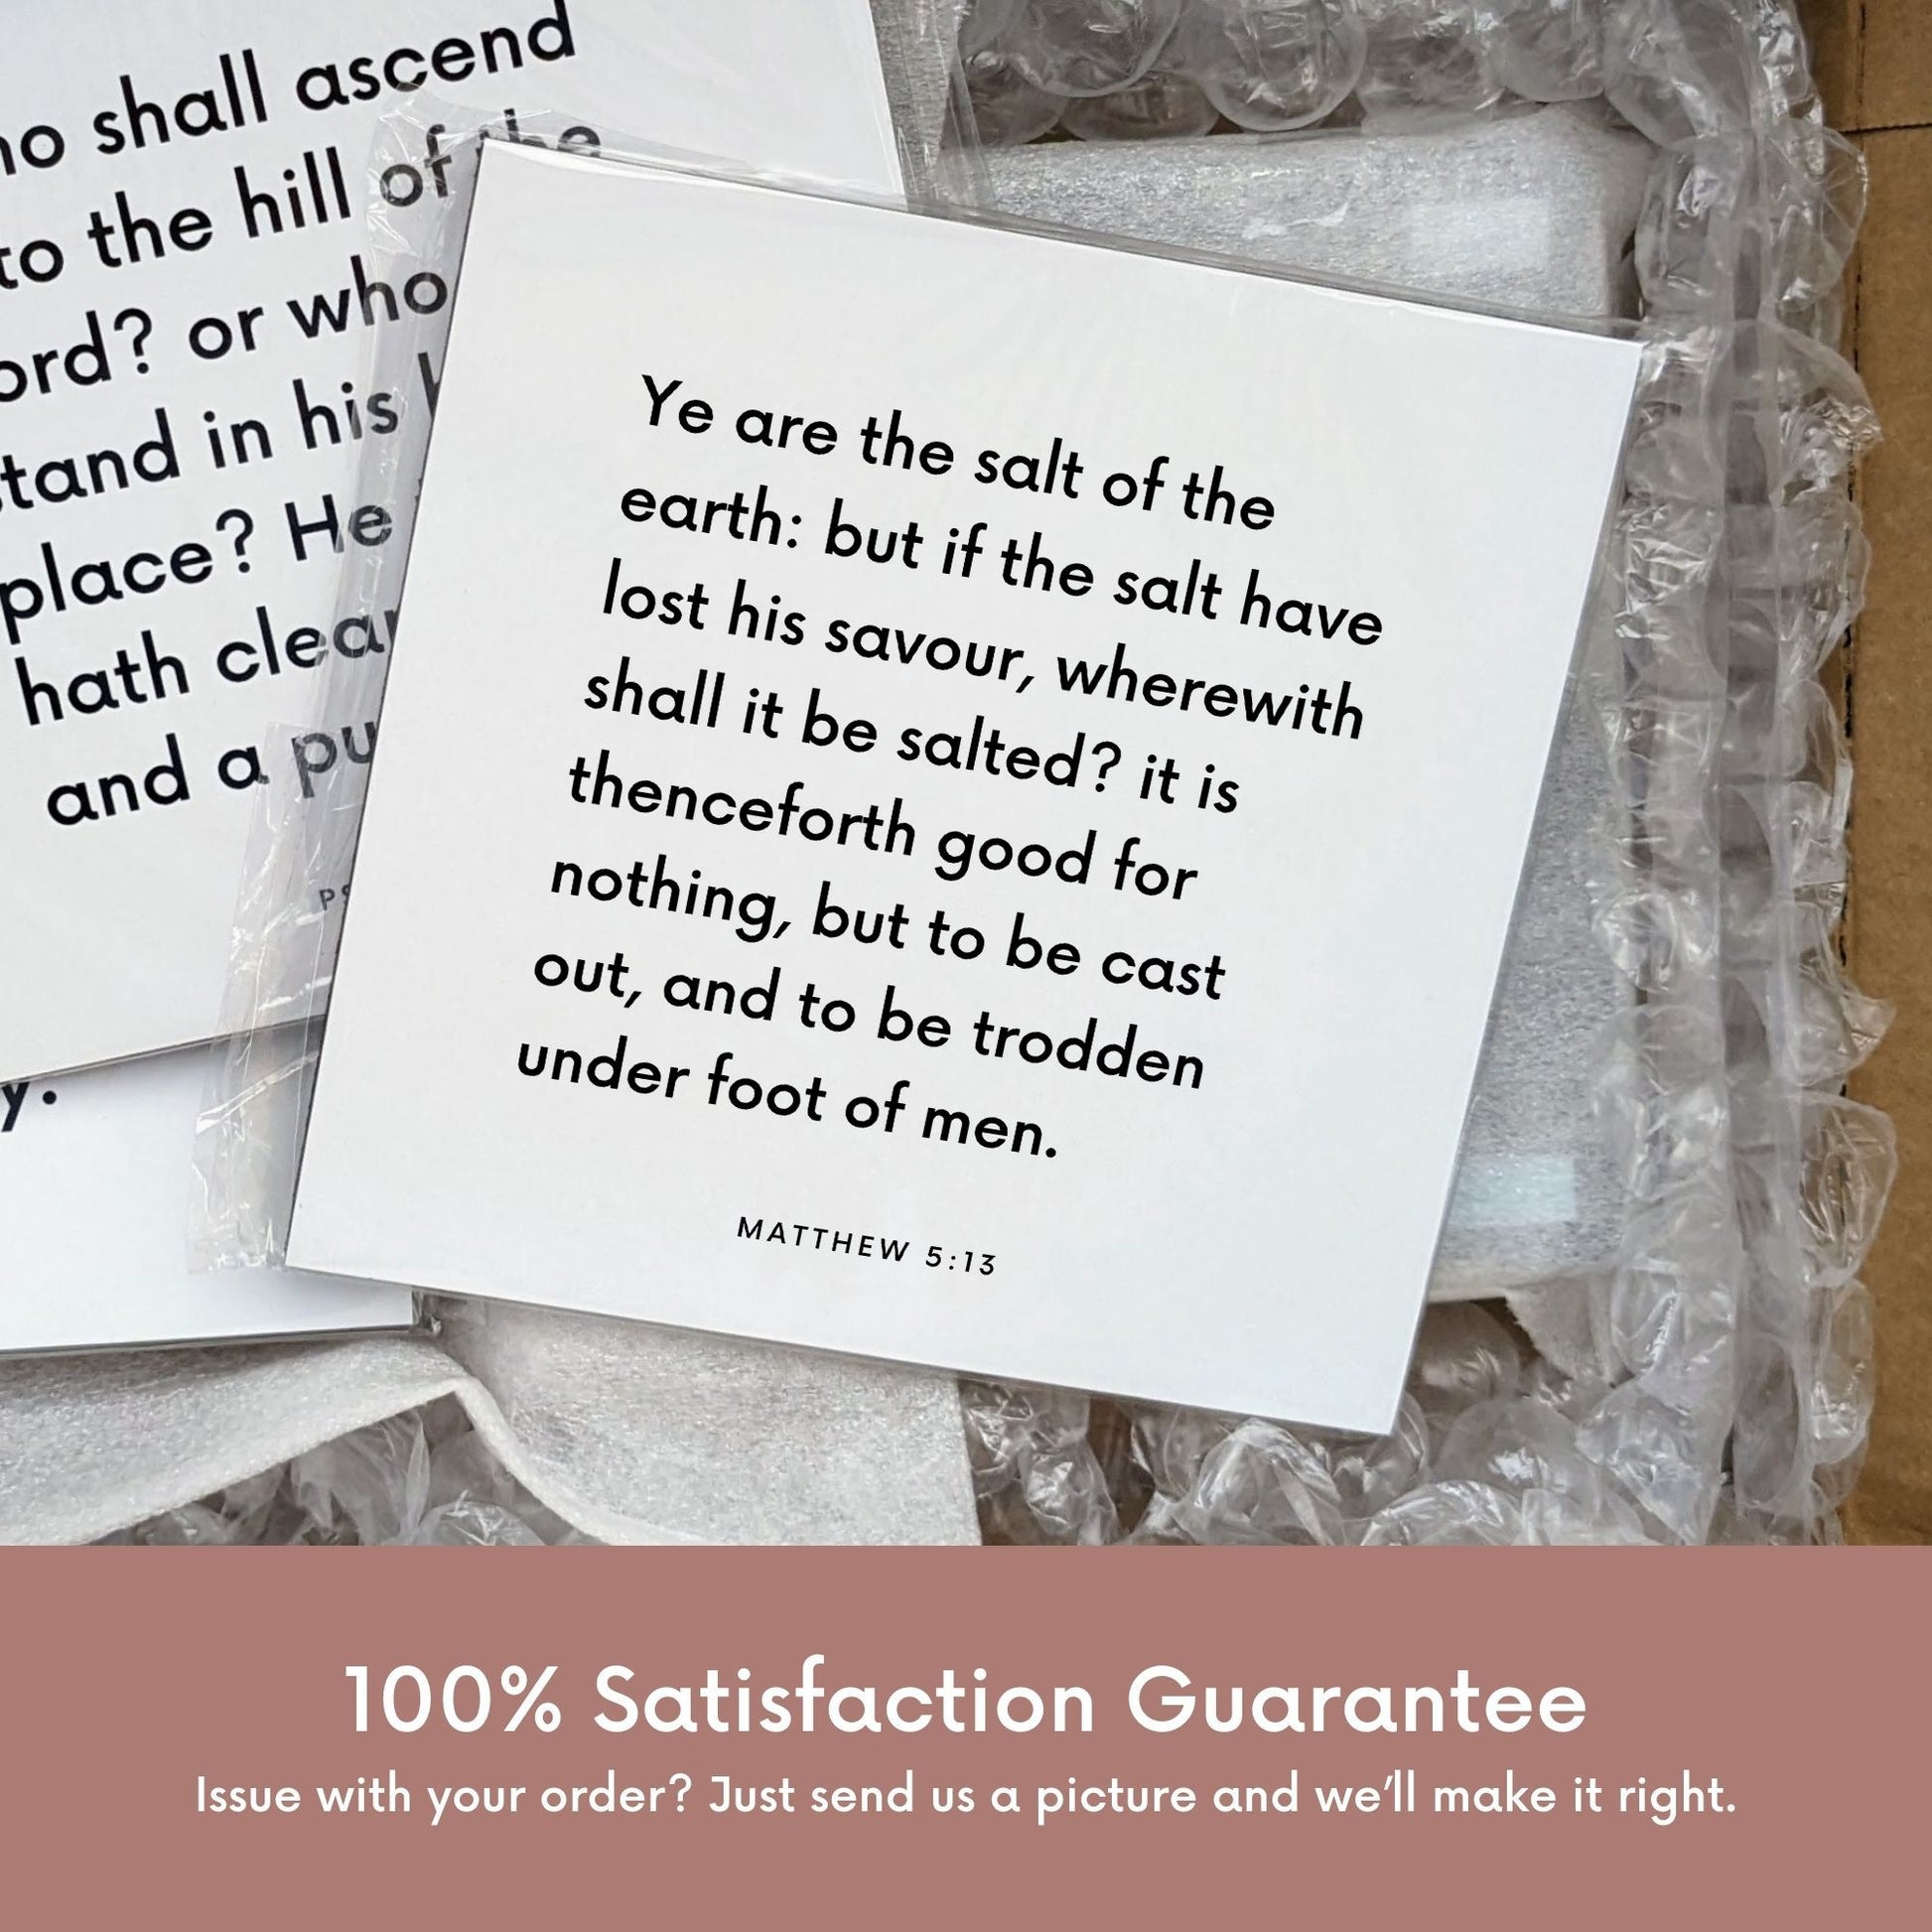 Shipping materials for scripture tile of Matthew 5:13 - "Ye are the salt of the earth"